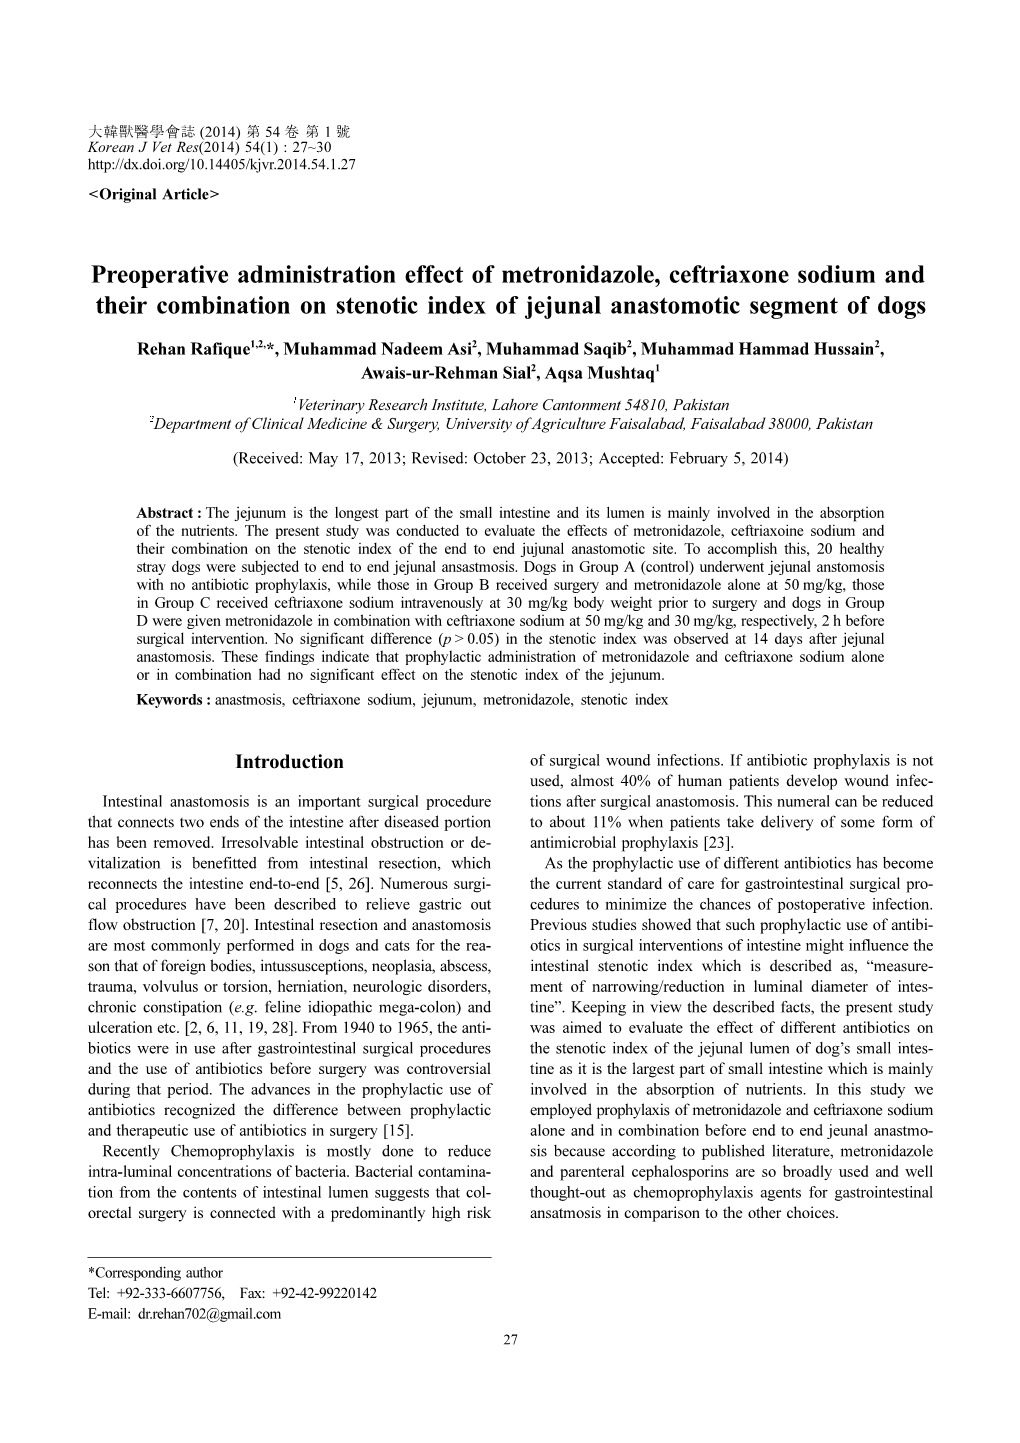 Preoperative Administration Effect of Metronidazole, Ceftriaxone Sodium